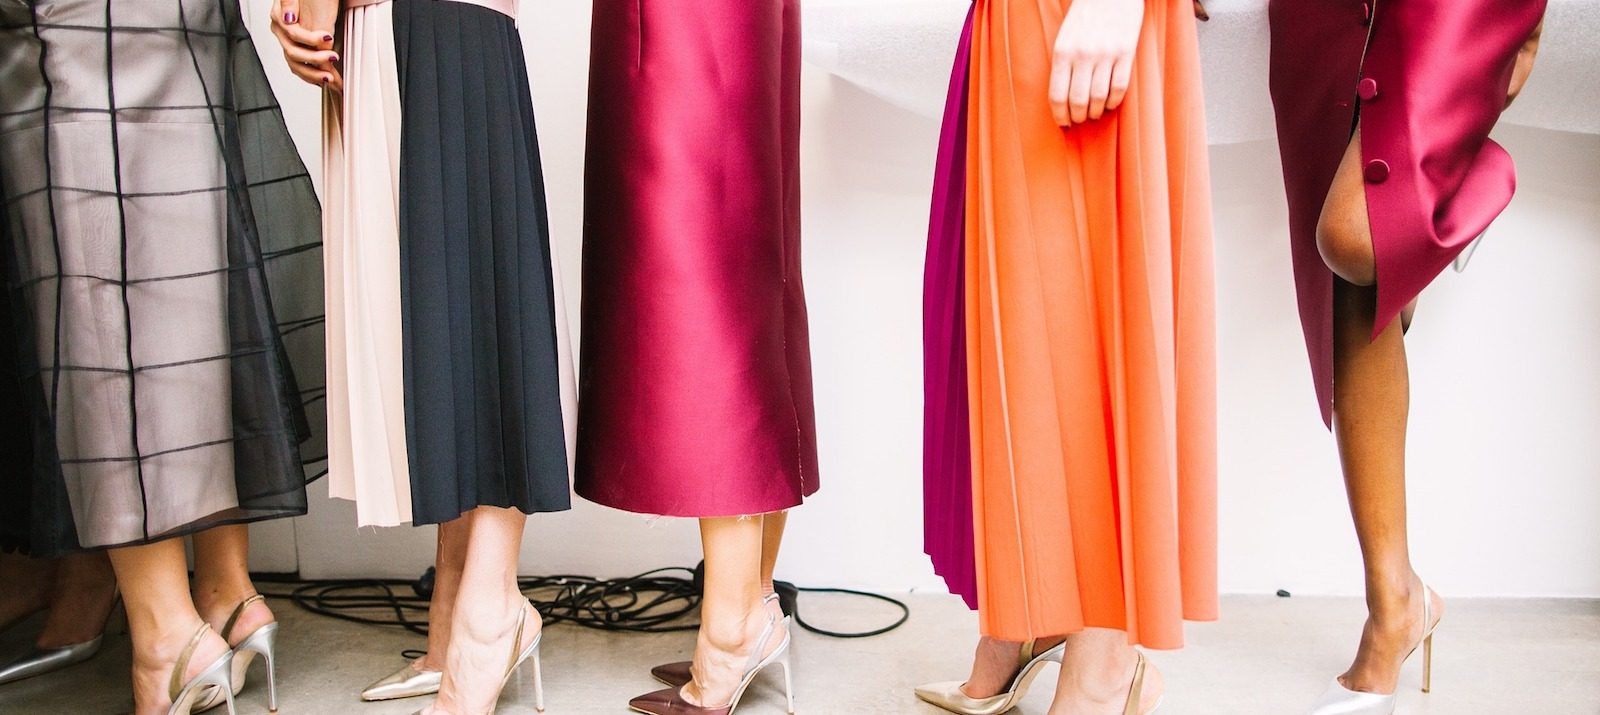 5 women wearing different skirts and dresses